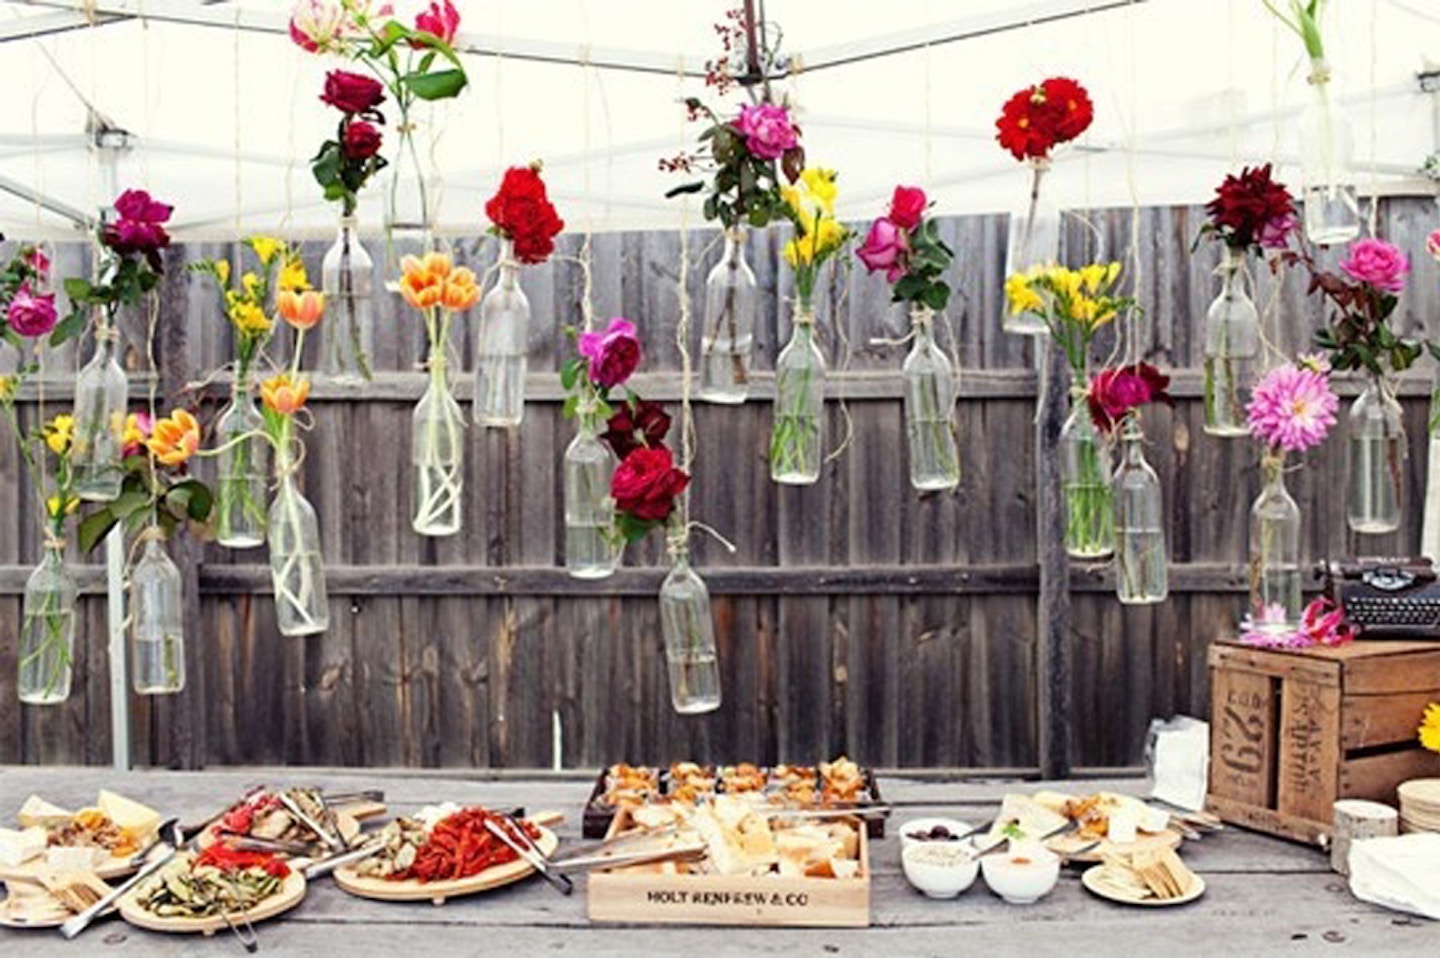 How to throw a chic (and cheap) backyard party